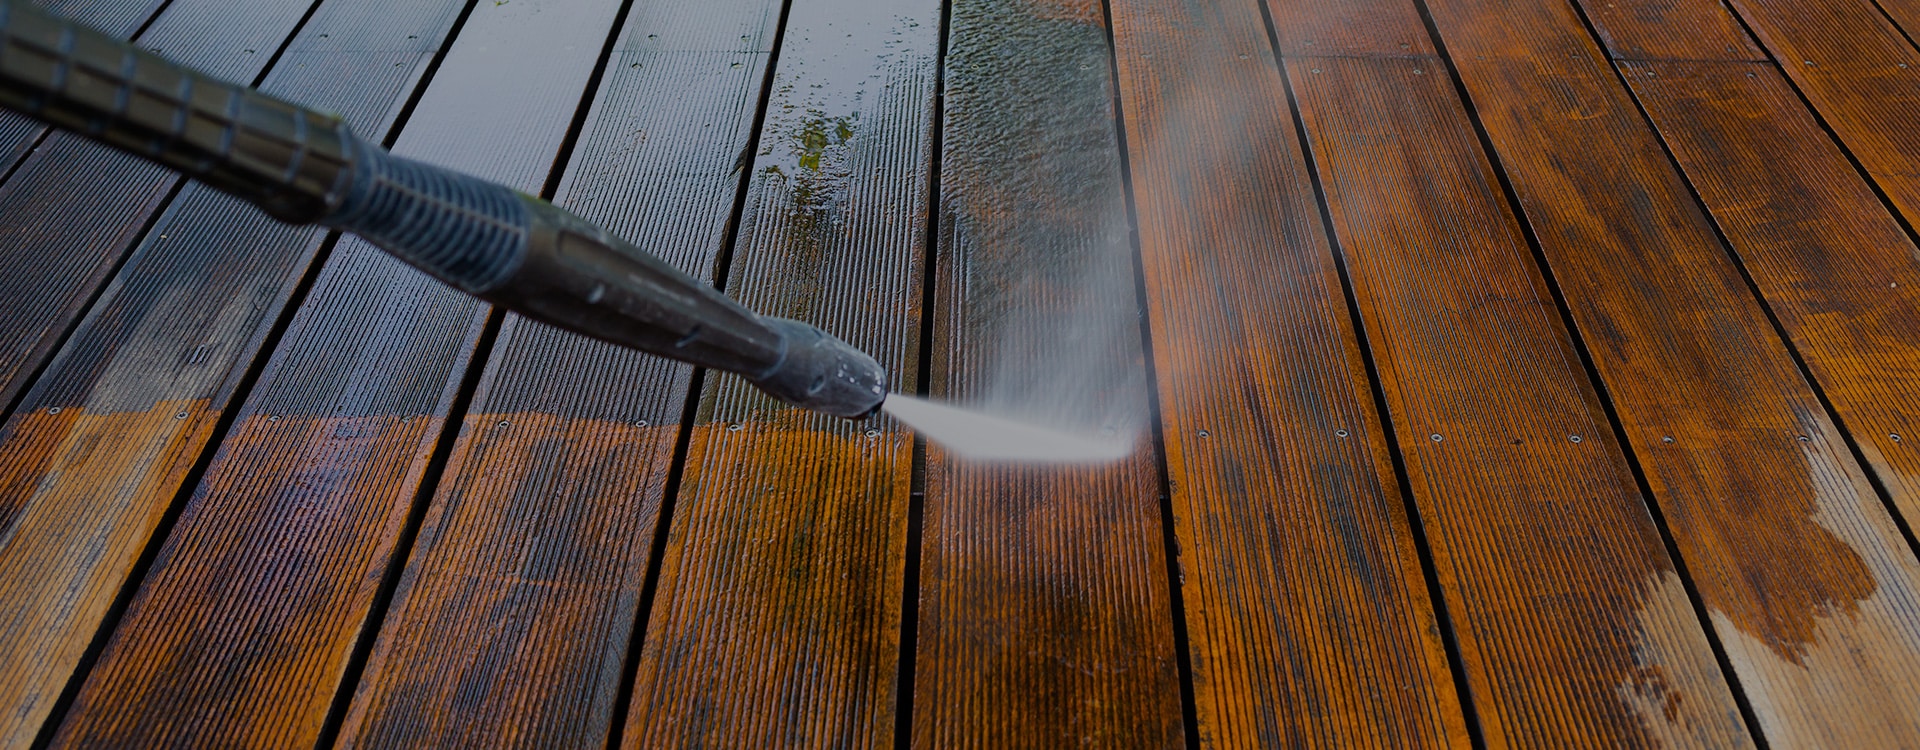 wood deck boards being power washed with water